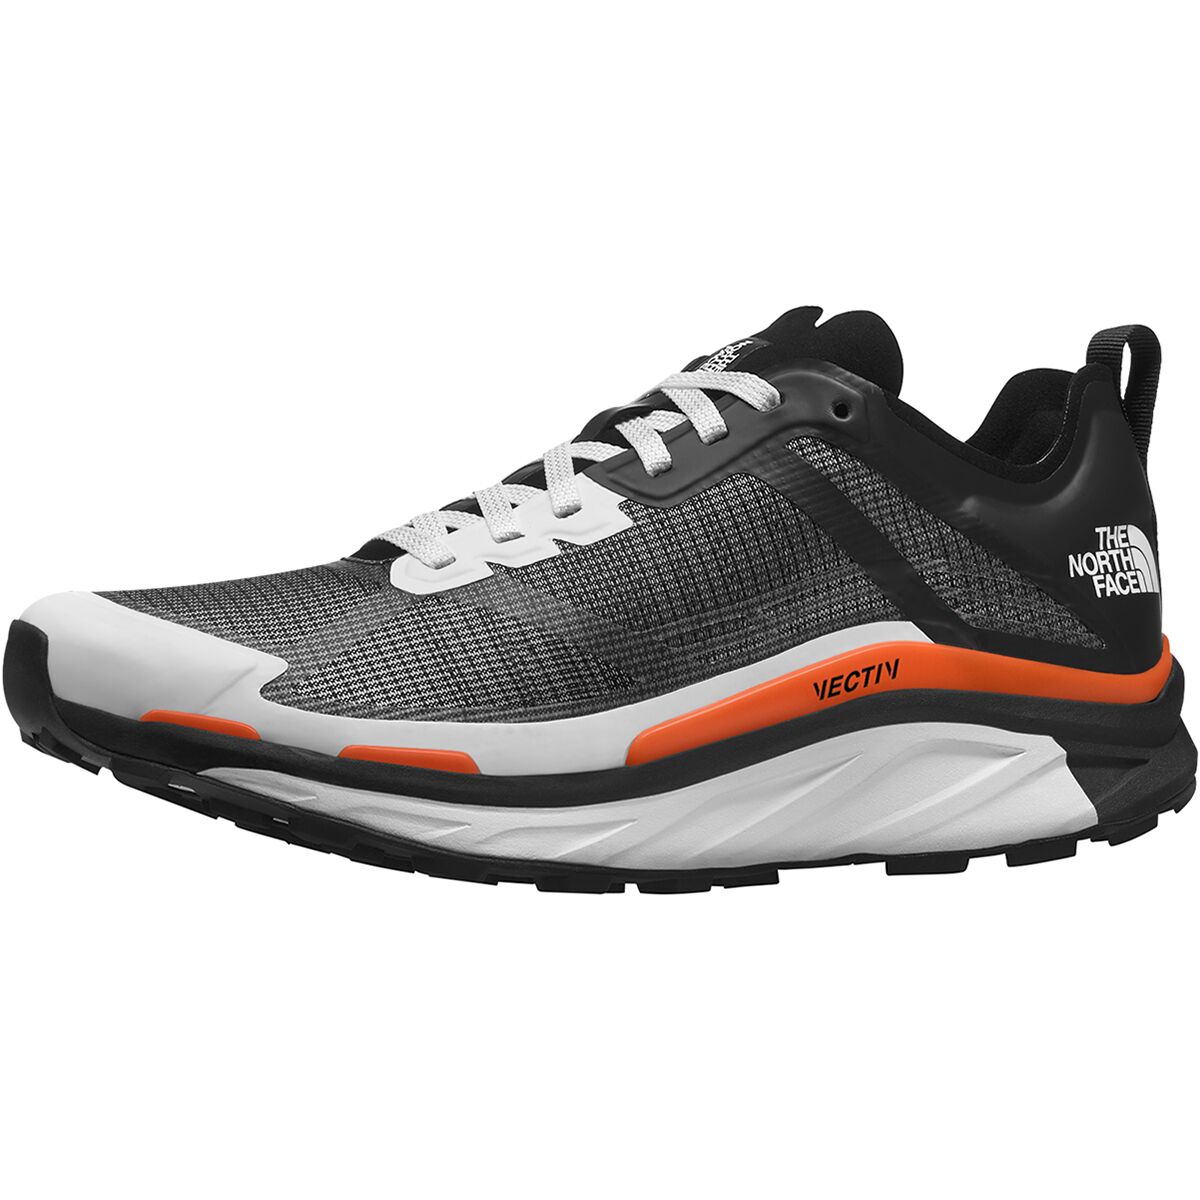 The North Face VECTIV Infinite Trail Running Shoe - Men's